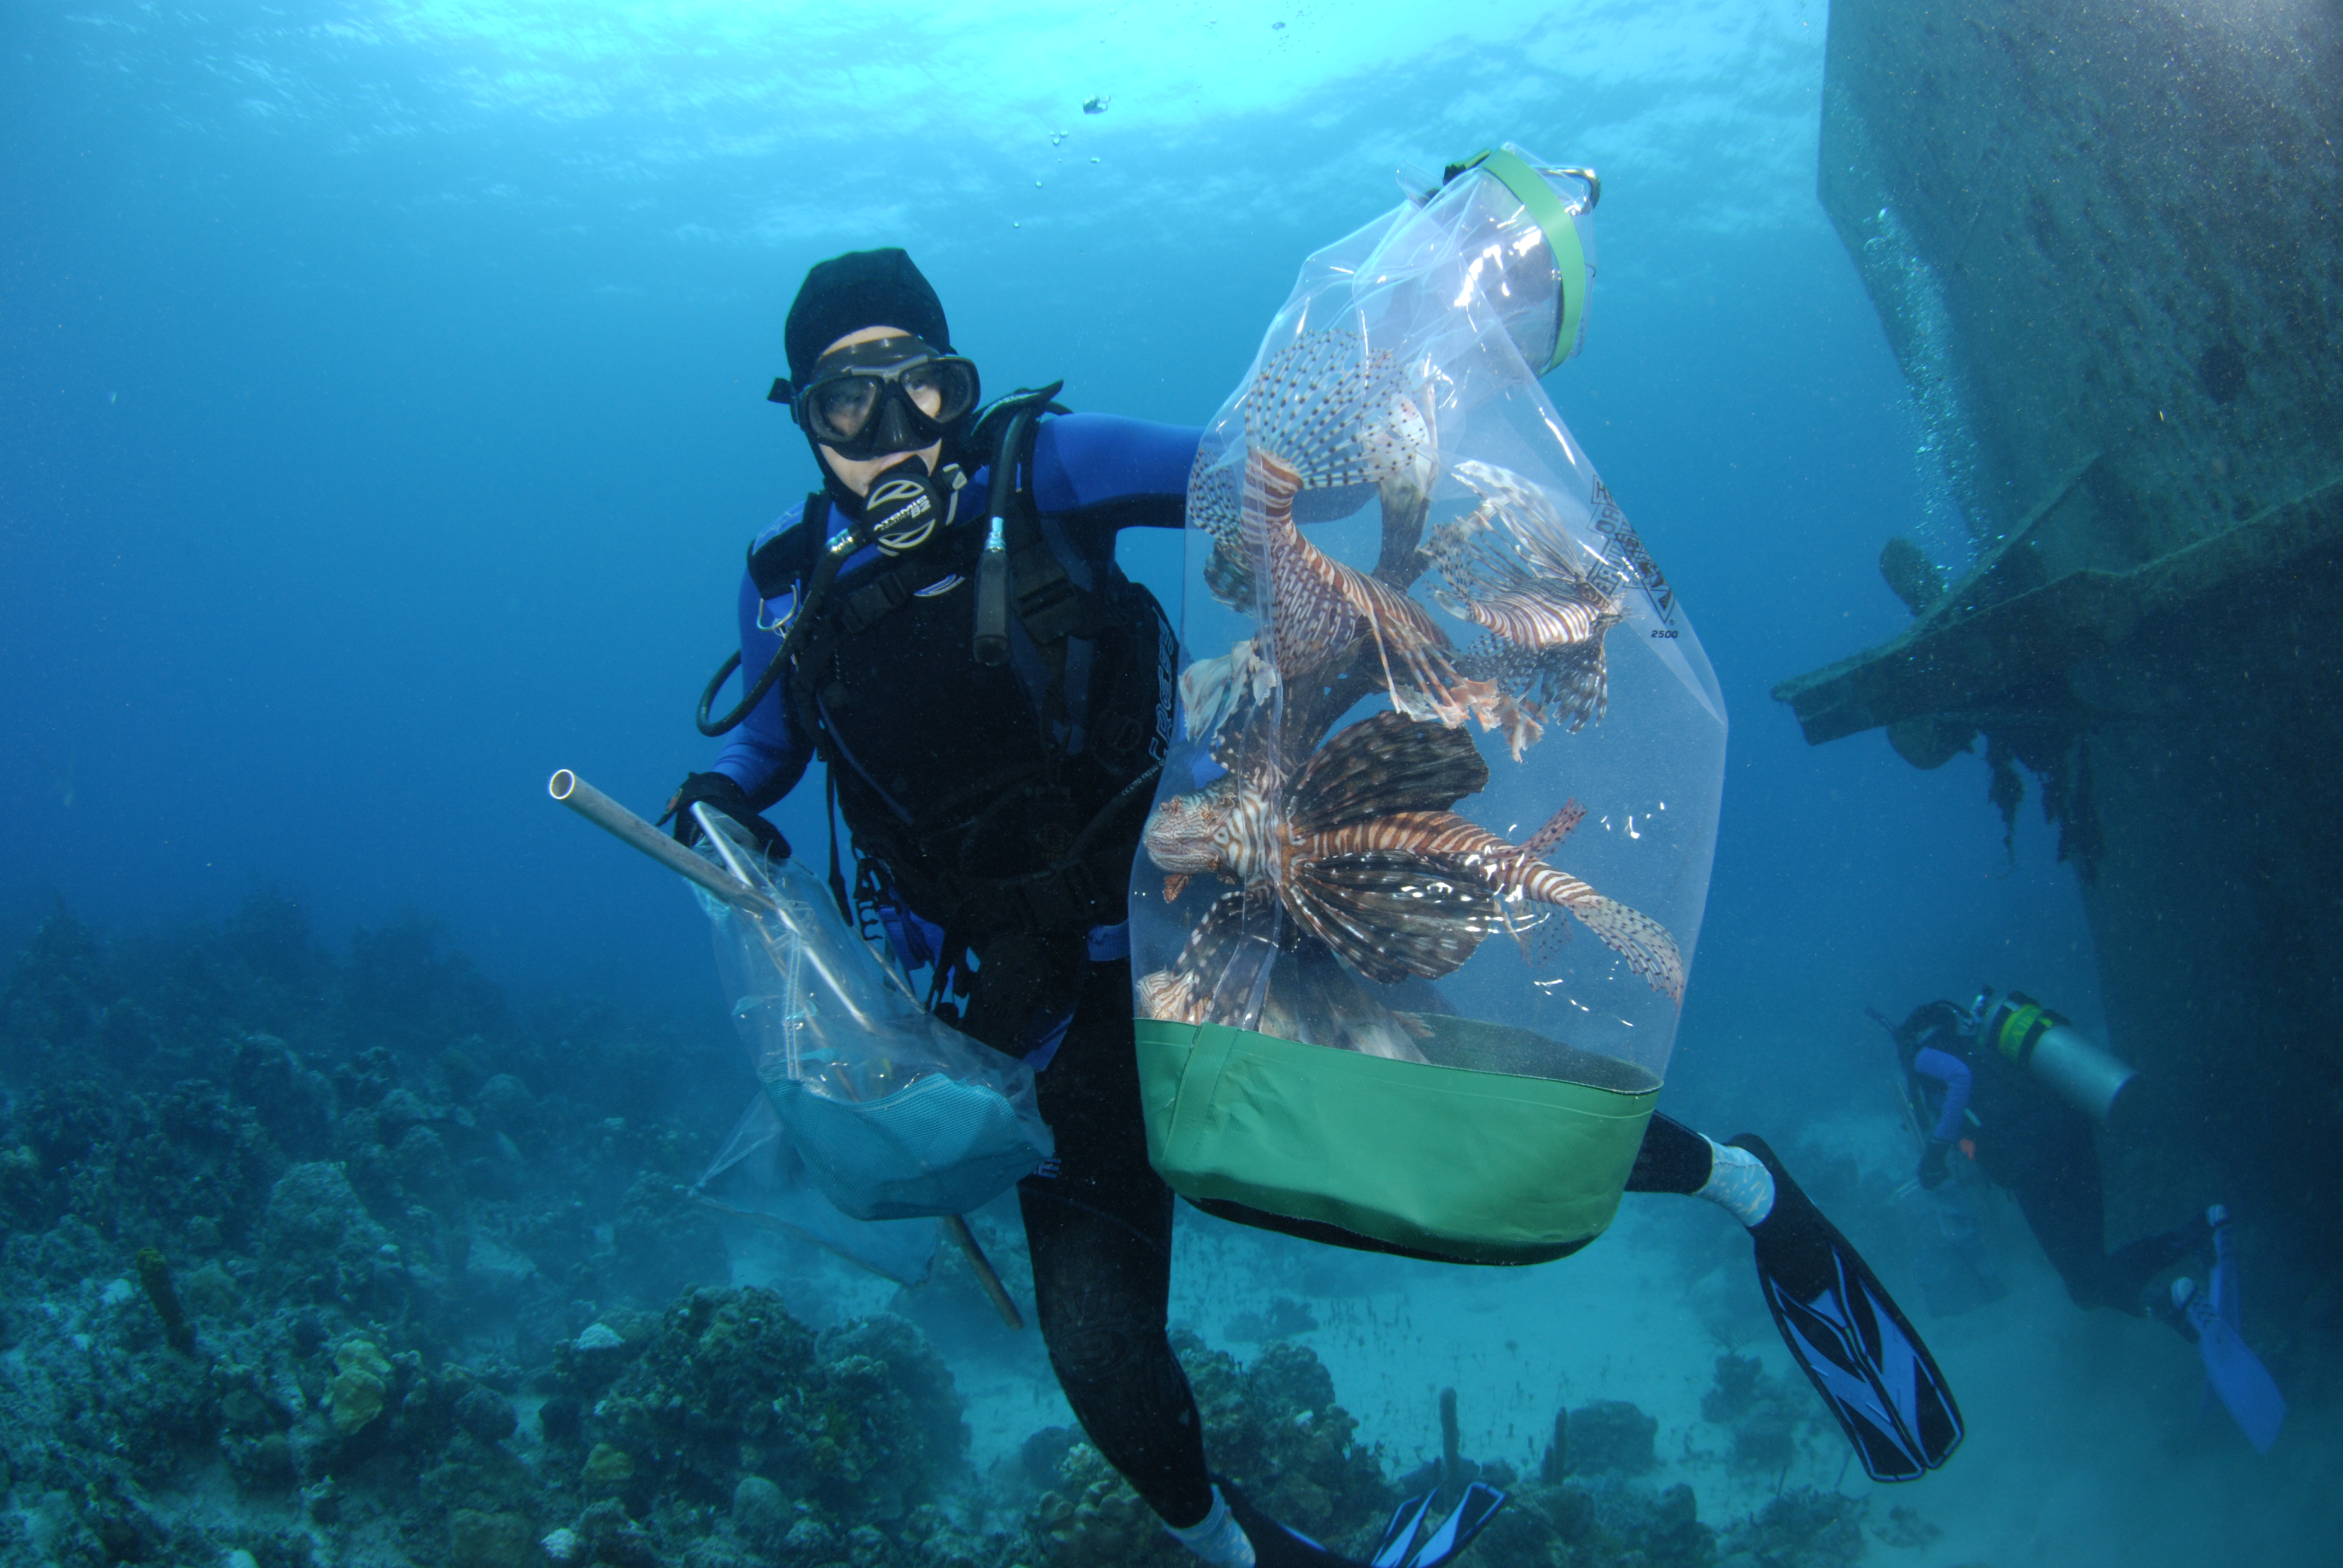 Divers take lionfish invasion into their own hands - CBS News